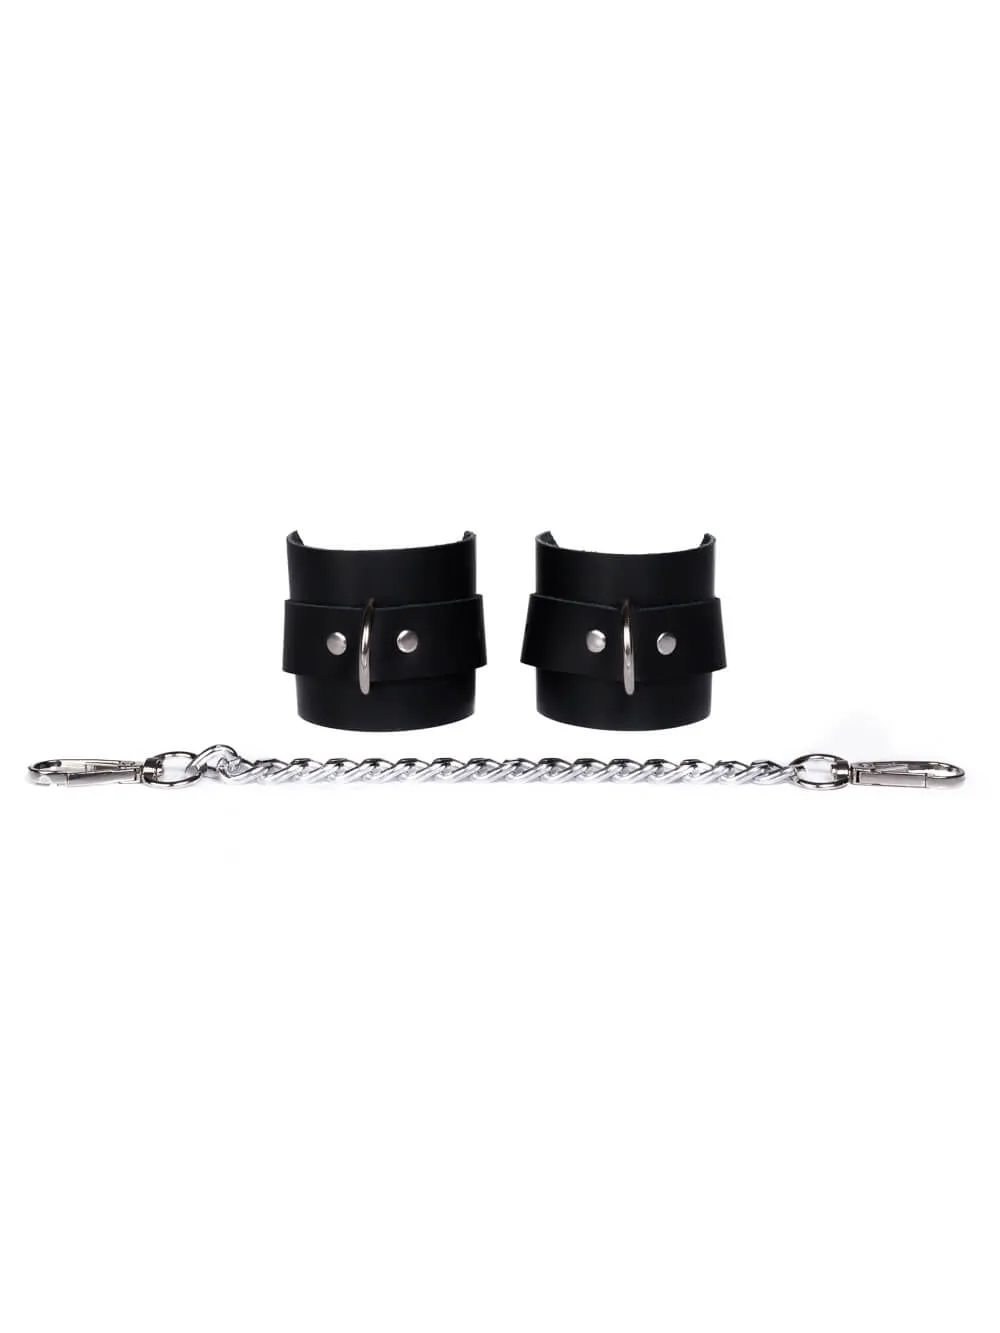 Softcore erotic leather handcuffs for BDSM.